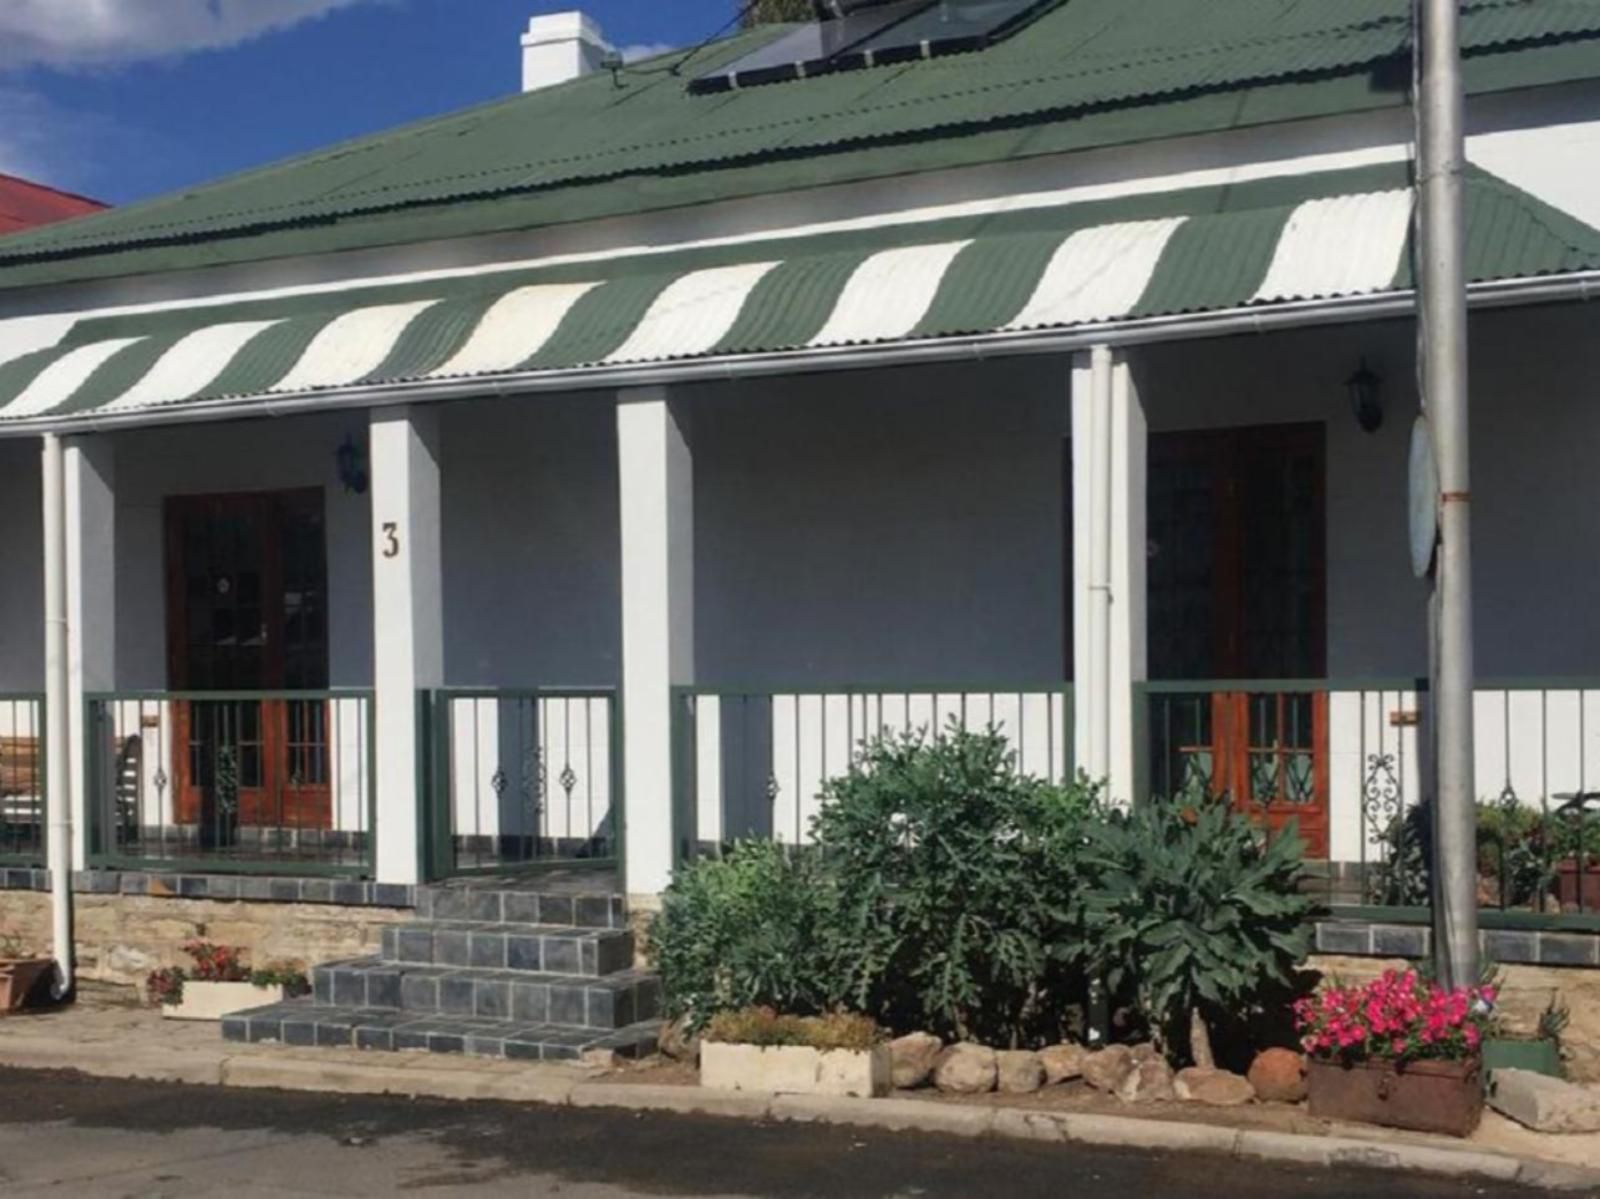 Horse And Mill Guest House Colesberg Northern Cape South Africa House, Building, Architecture, Window